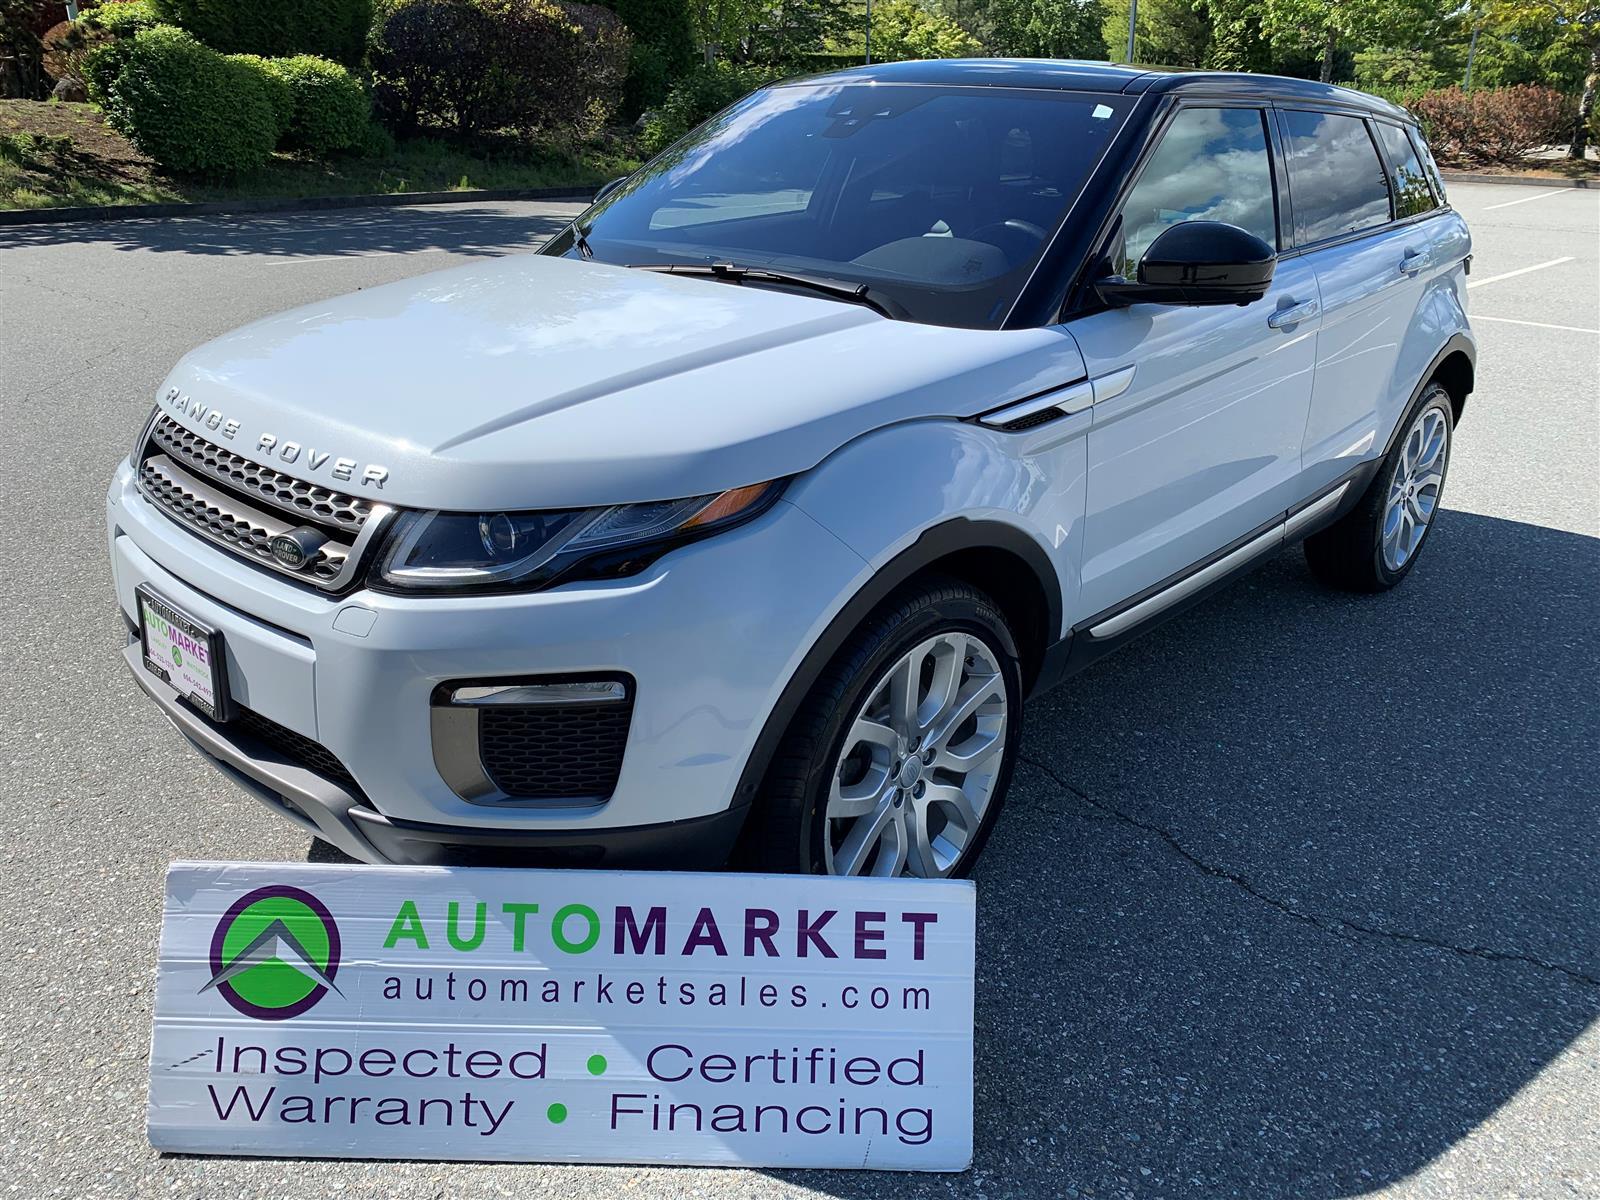 2017 Land Rover Range Rover Evoque HSE Si4 LOADED, WARRANTY, FINANCING, INSPECTED W/ 